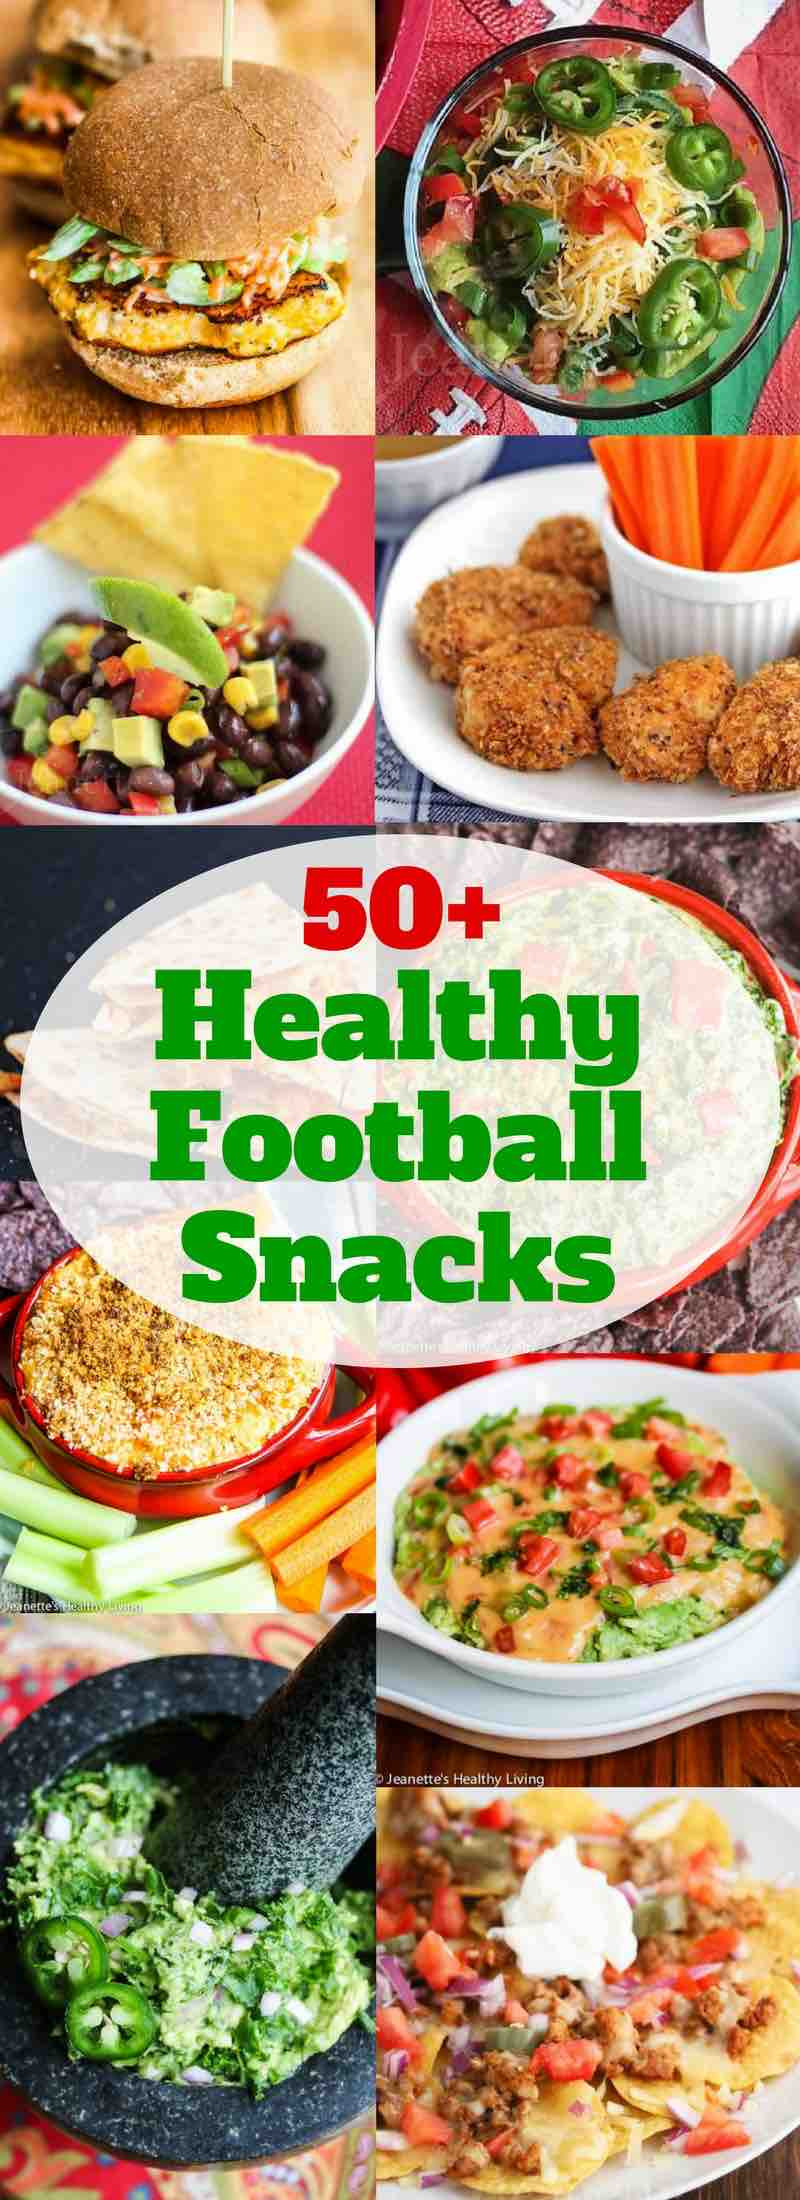 Healthy Football Snacks
 50 Healthy Football Snacks Jeanette s Healthy Living